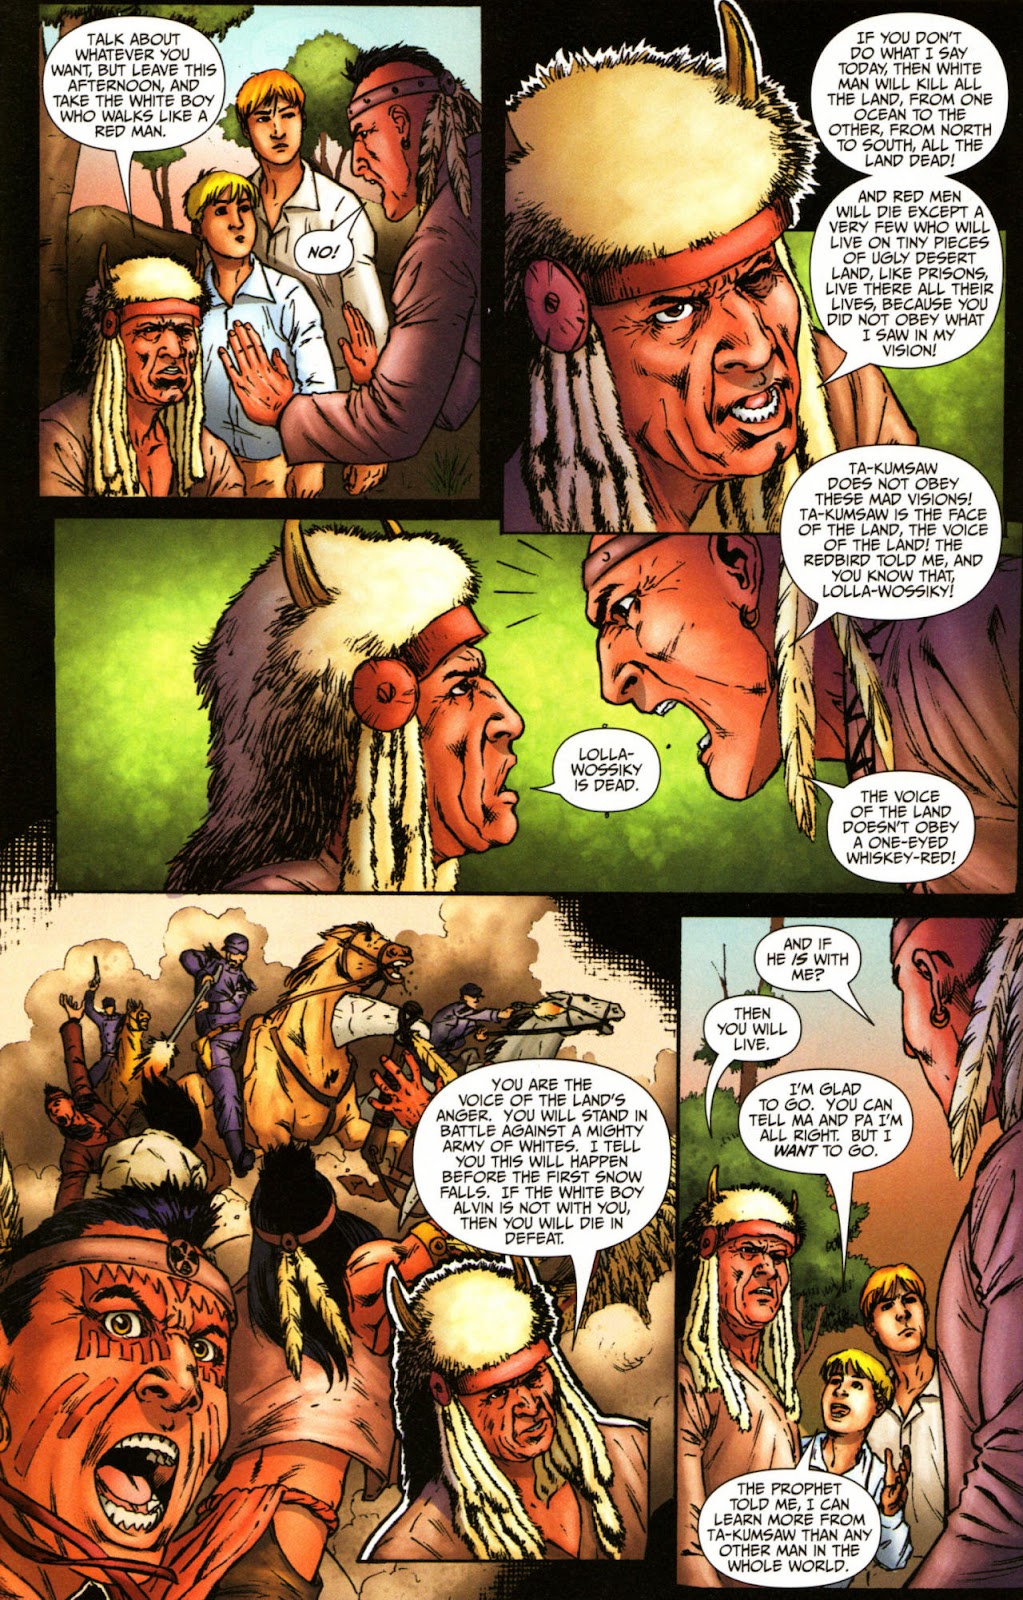 Red Prophet: The Tales of Alvin Maker issue 7 - Page 11